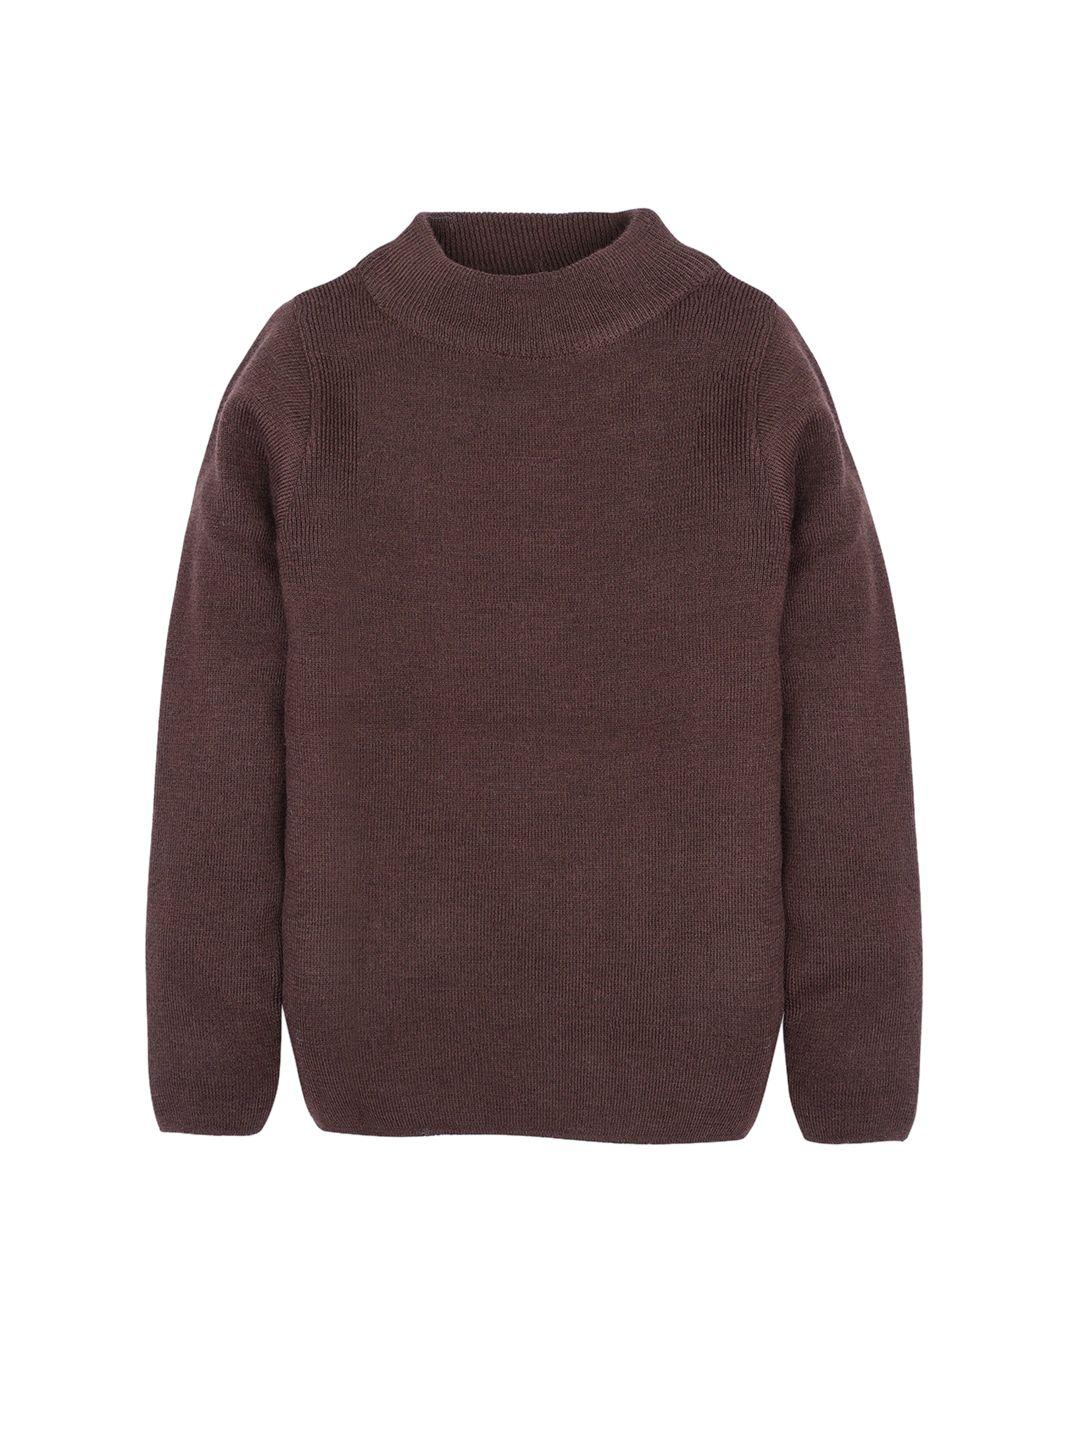 rvk-kids-coffee-brown-solid-pullover-sweater